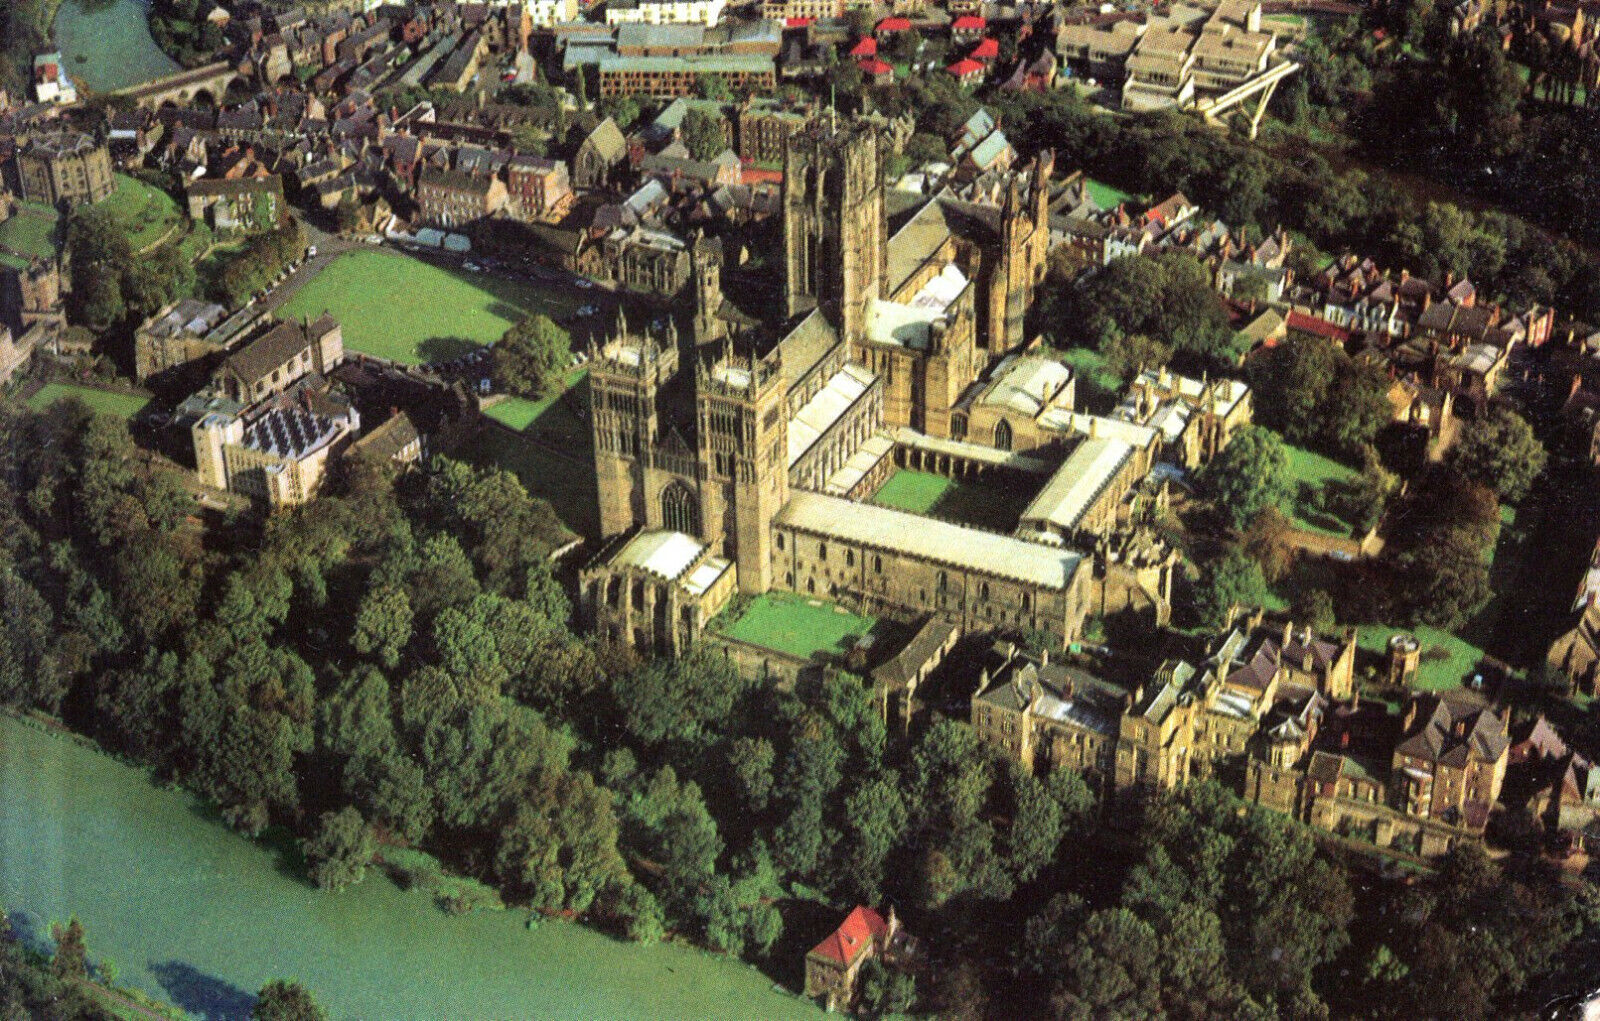 House Clearance - England-Durham-Aerial view of the Cathedral and old city - 1980